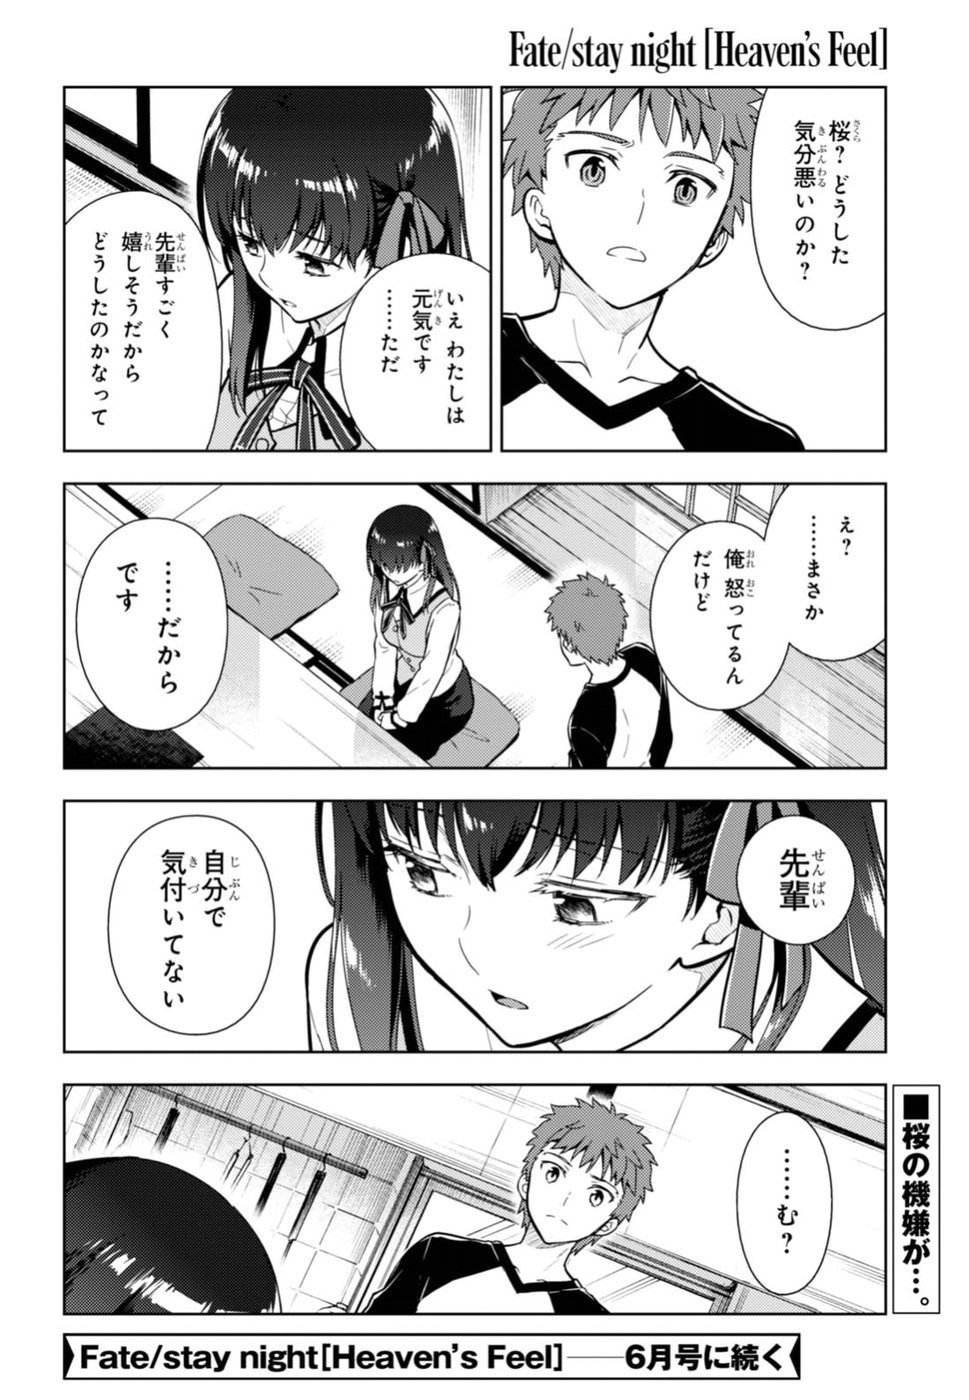 Fate/Stay night Heaven's Feel - Chapter 36 - Page 38